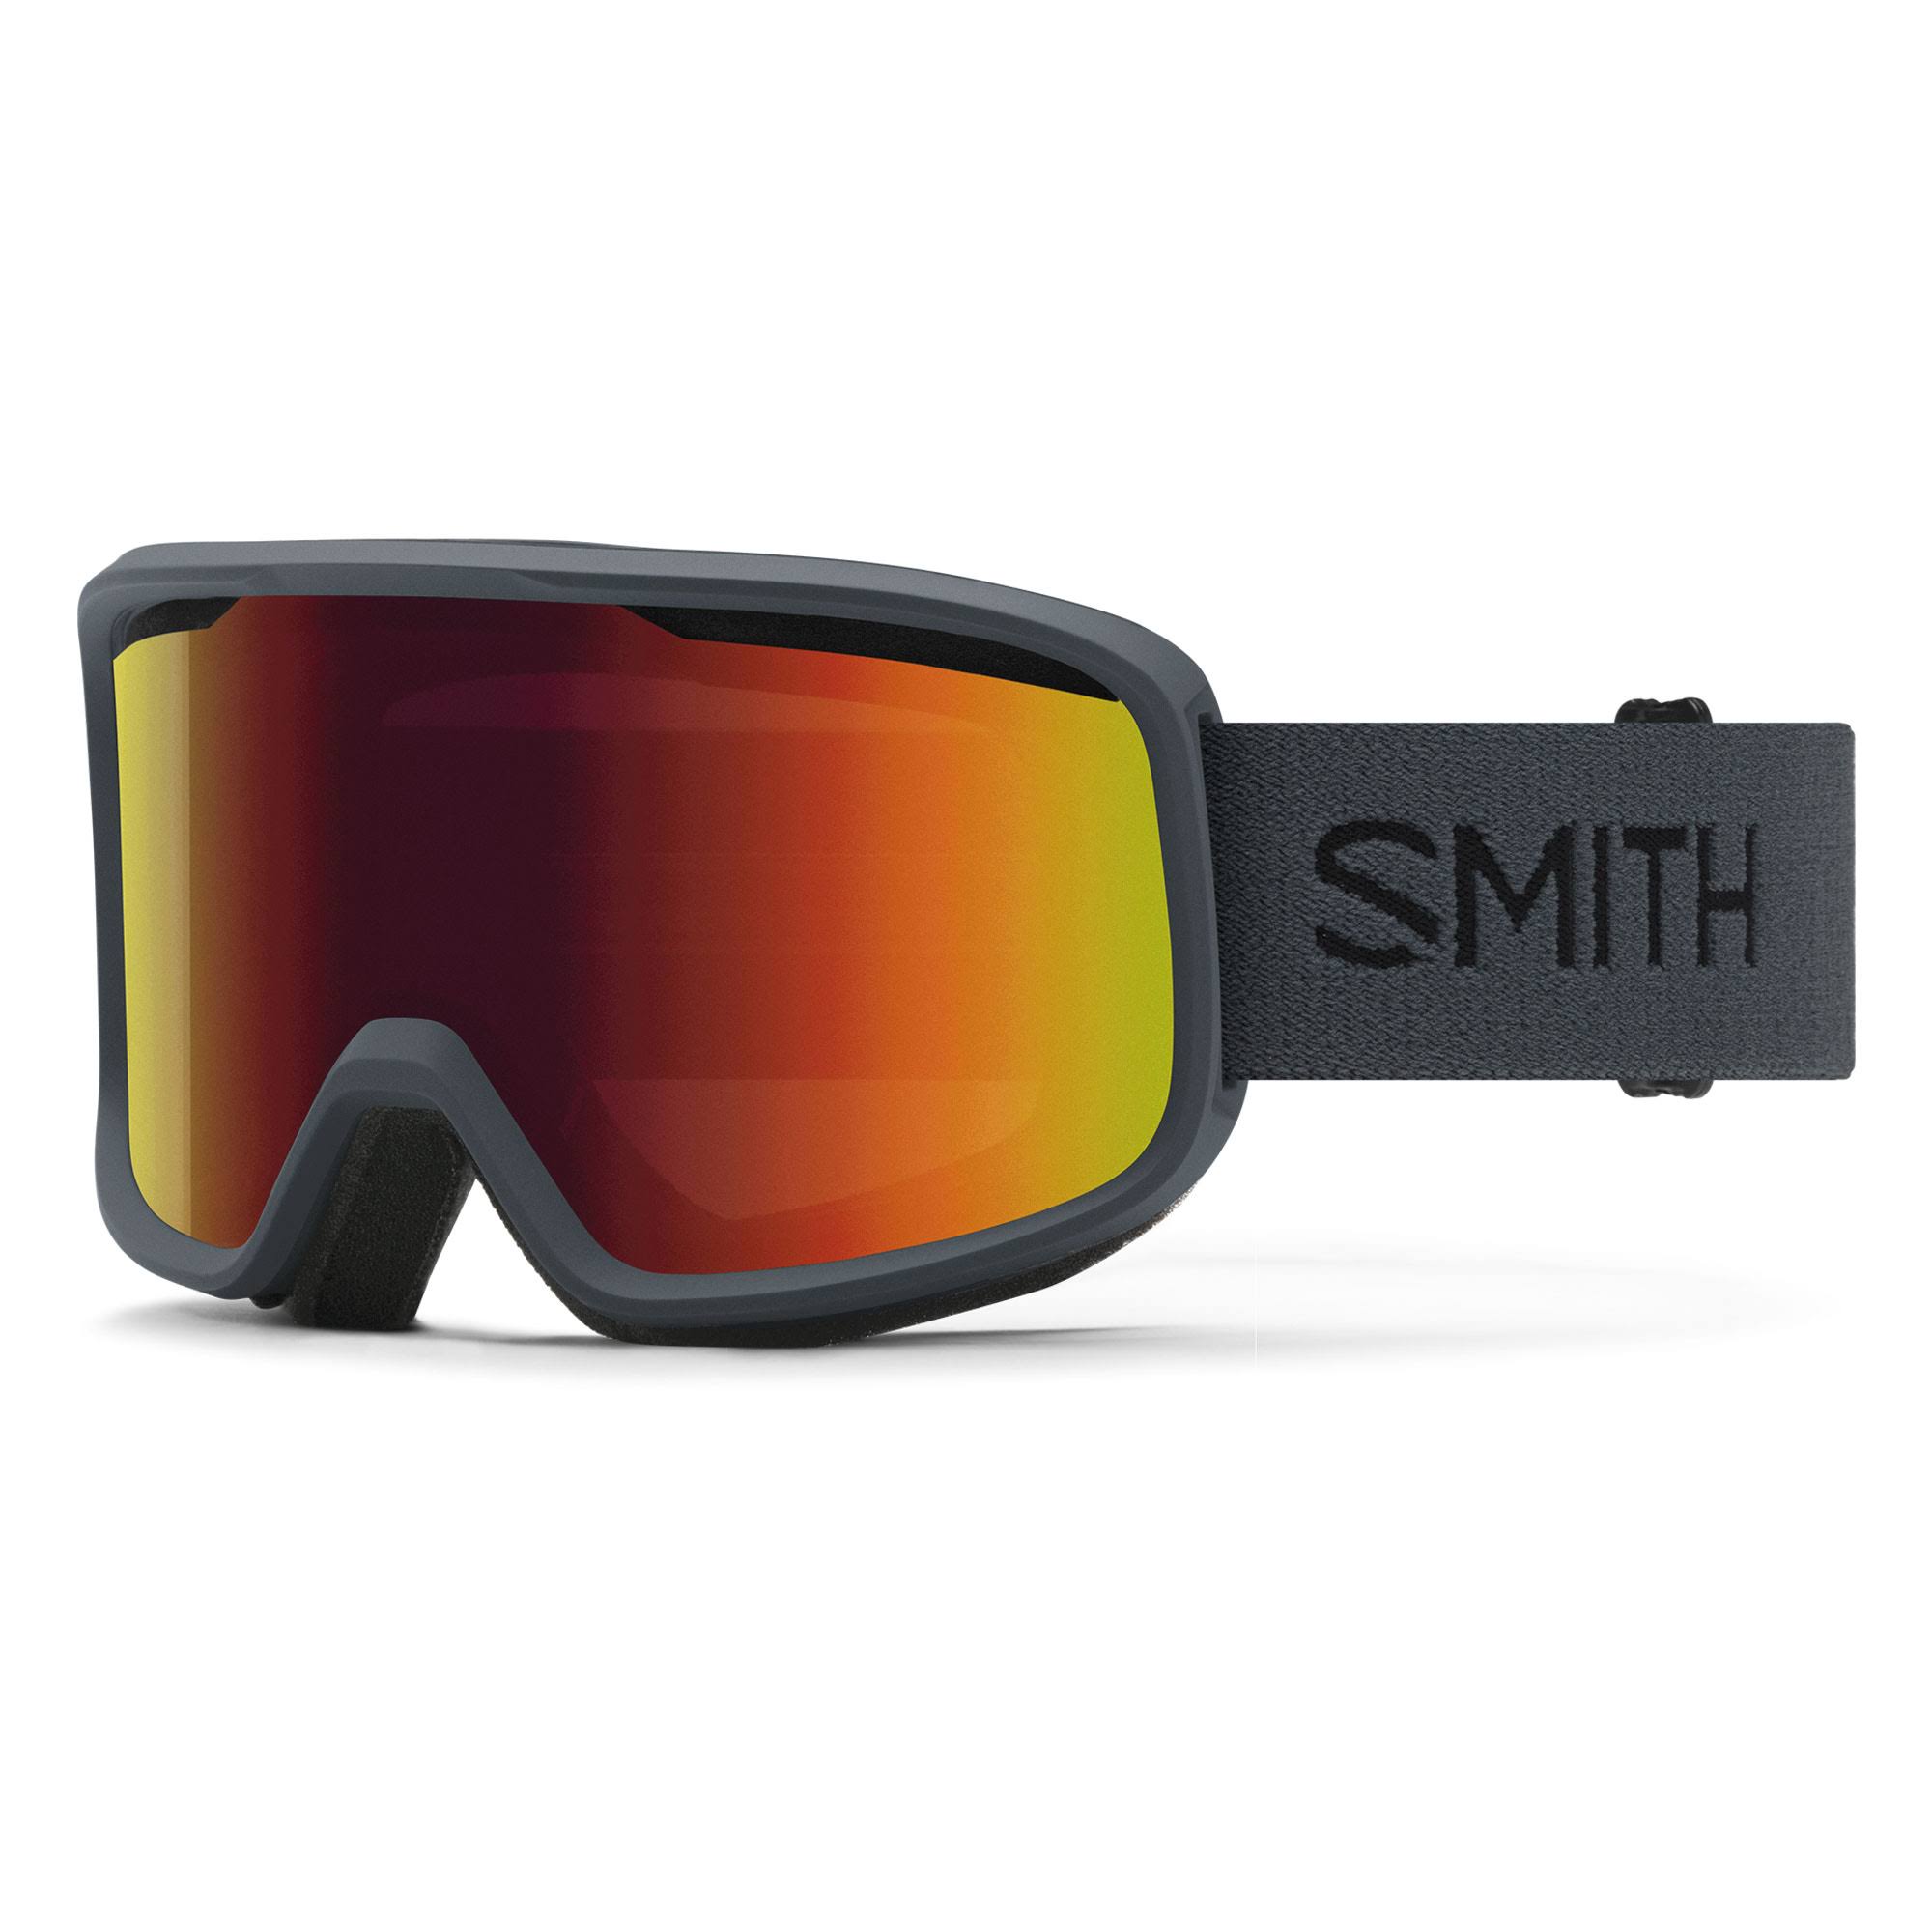 Smith - Frontier Slate Red Sol-X Mirror - Goggles